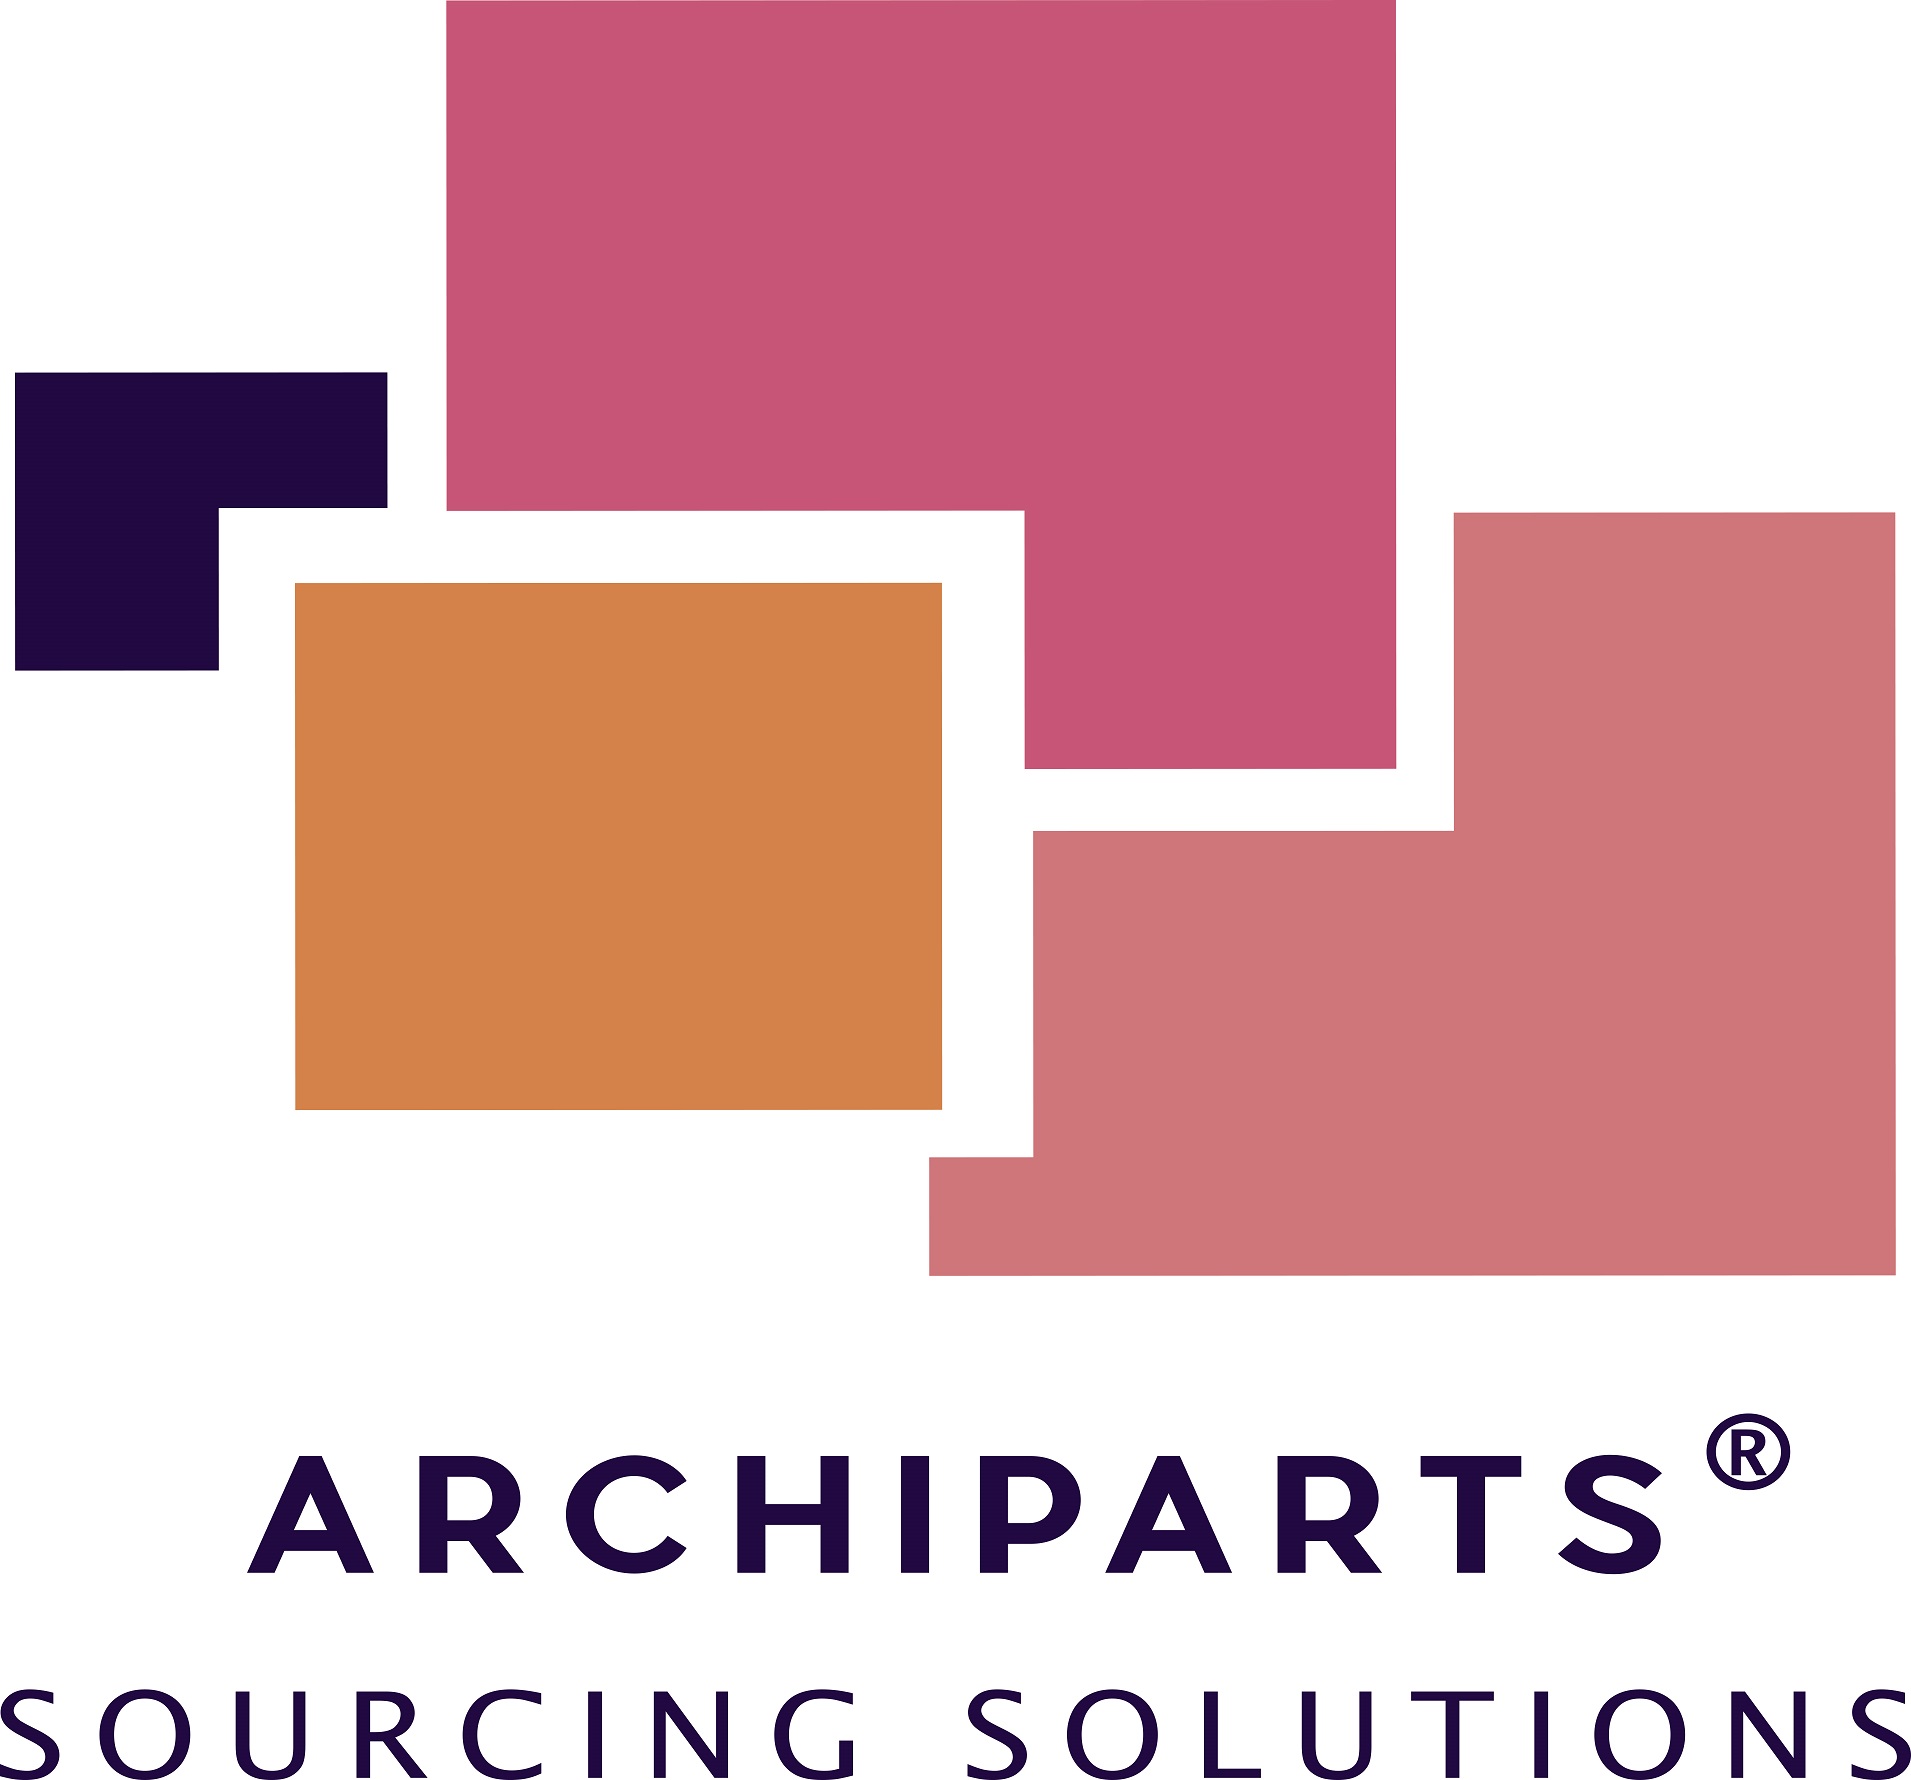 ARCHIPARTS